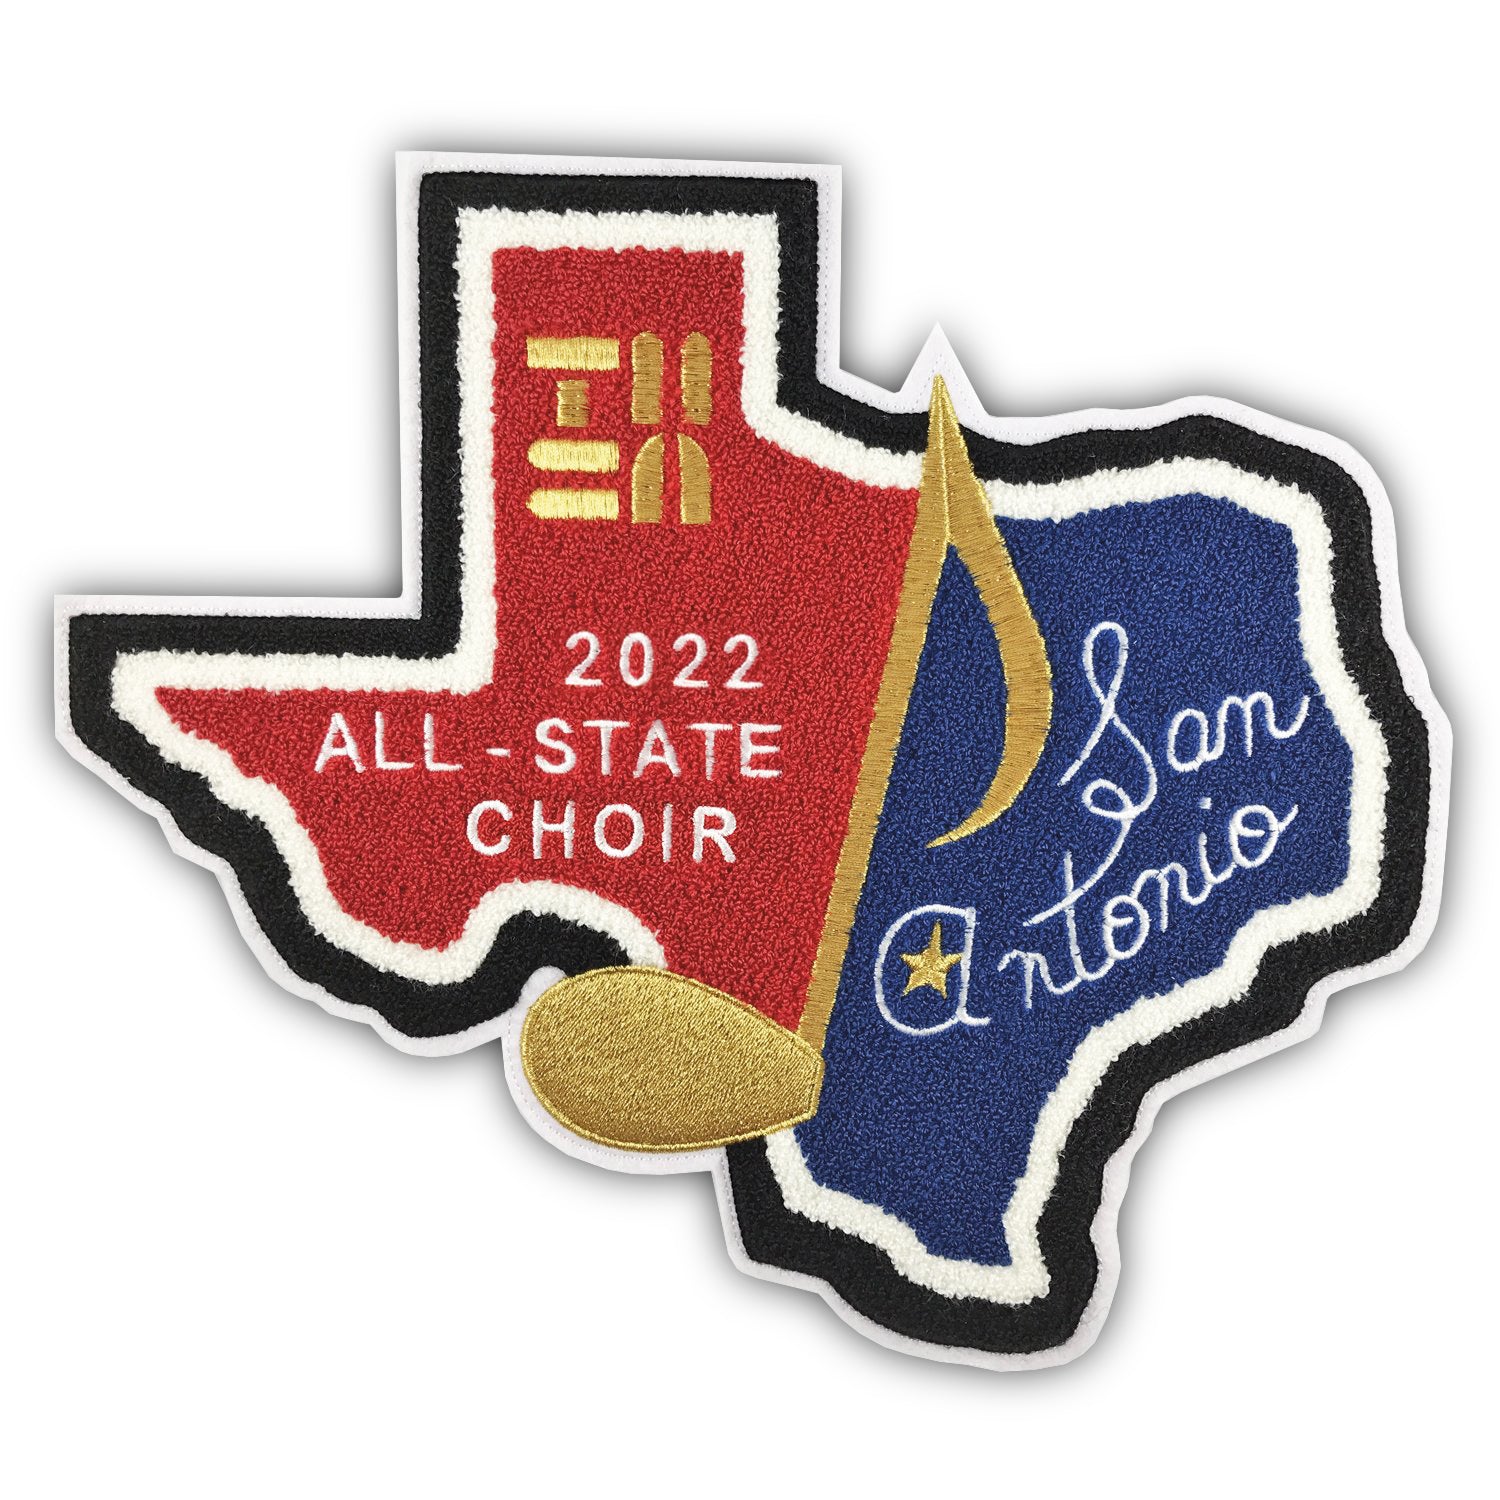 PREVIOUS YEARS - TMEA All-State Patches